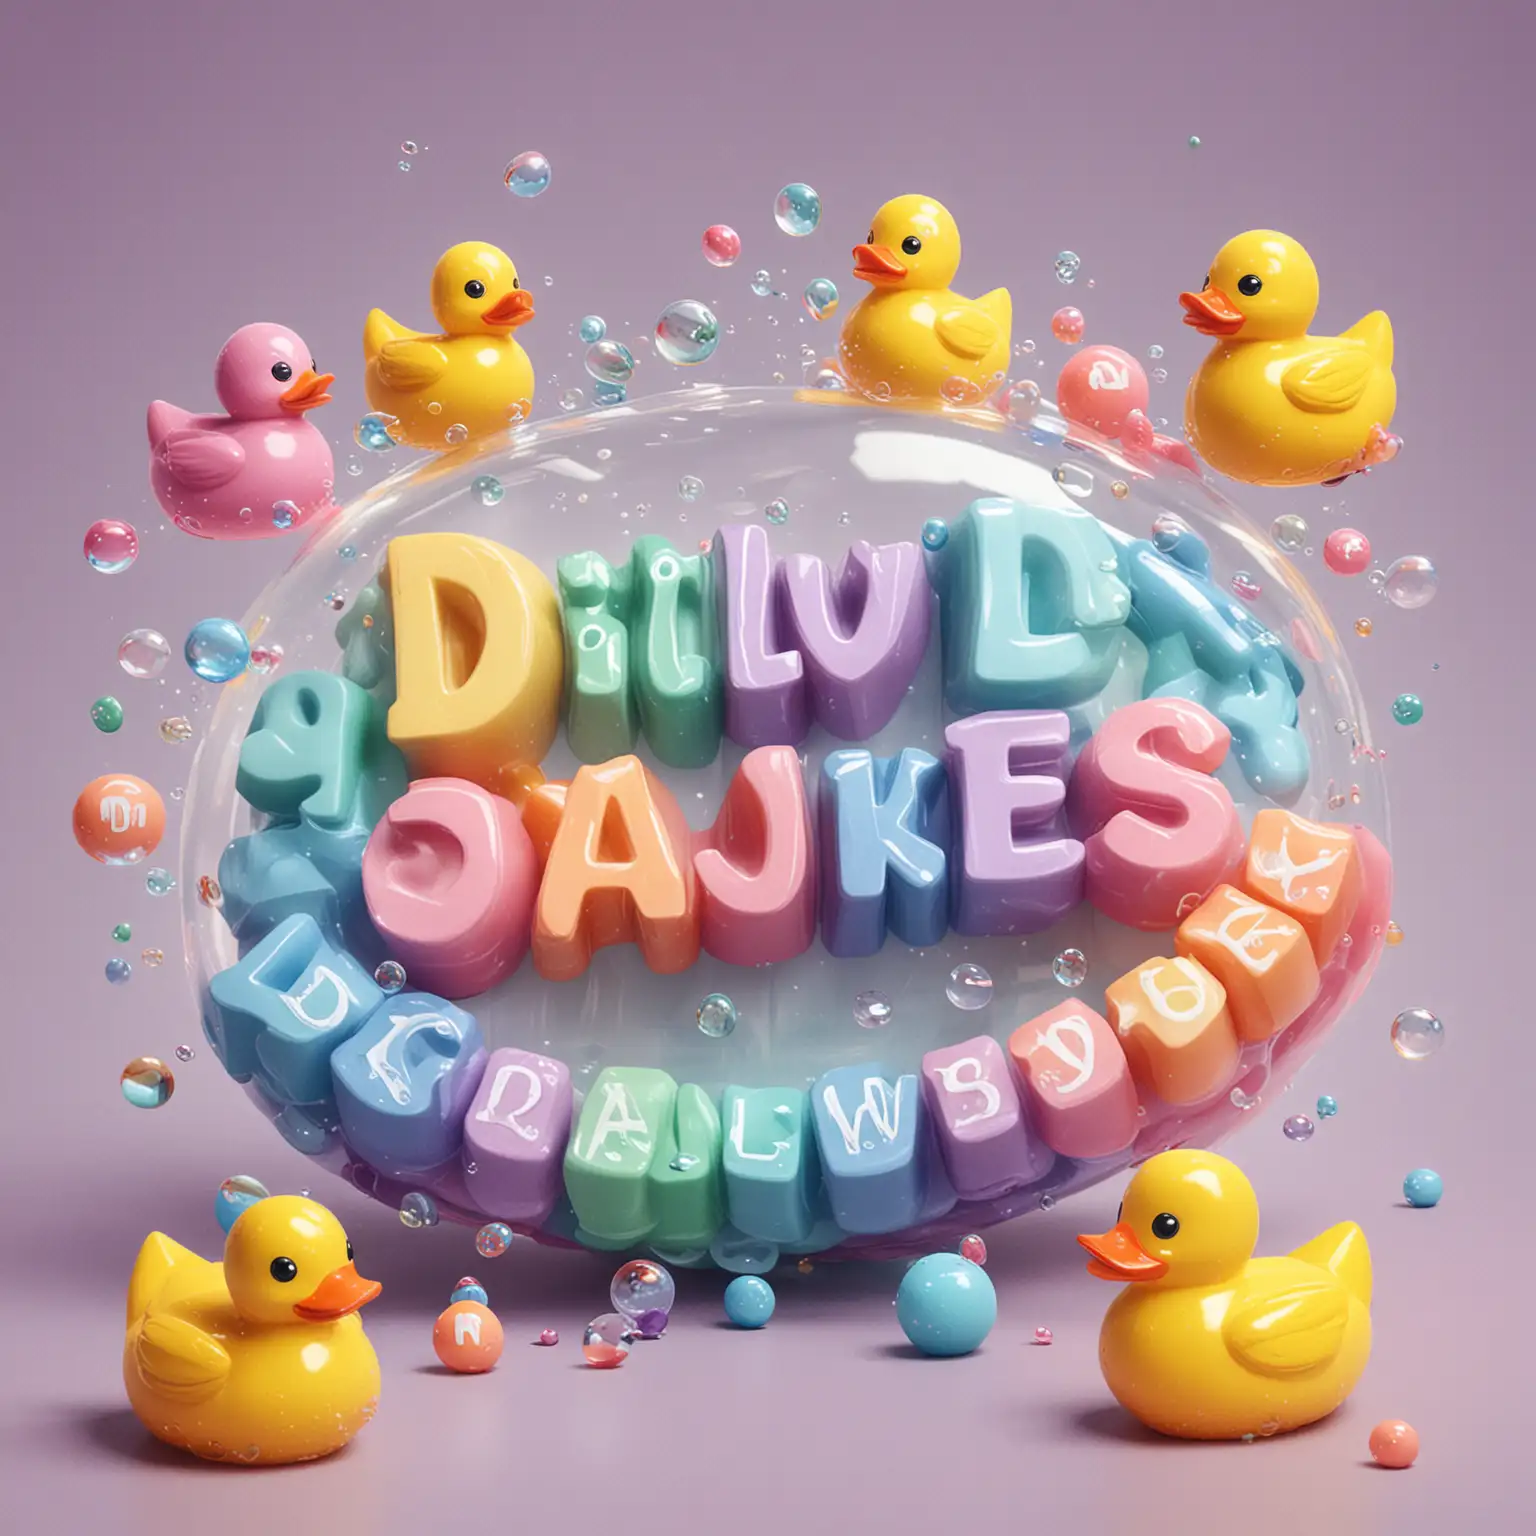 Business logo, 3d bubble Letters saying "DILLY DALLY DUCKS", rainbow pastel rubber ducks below letters